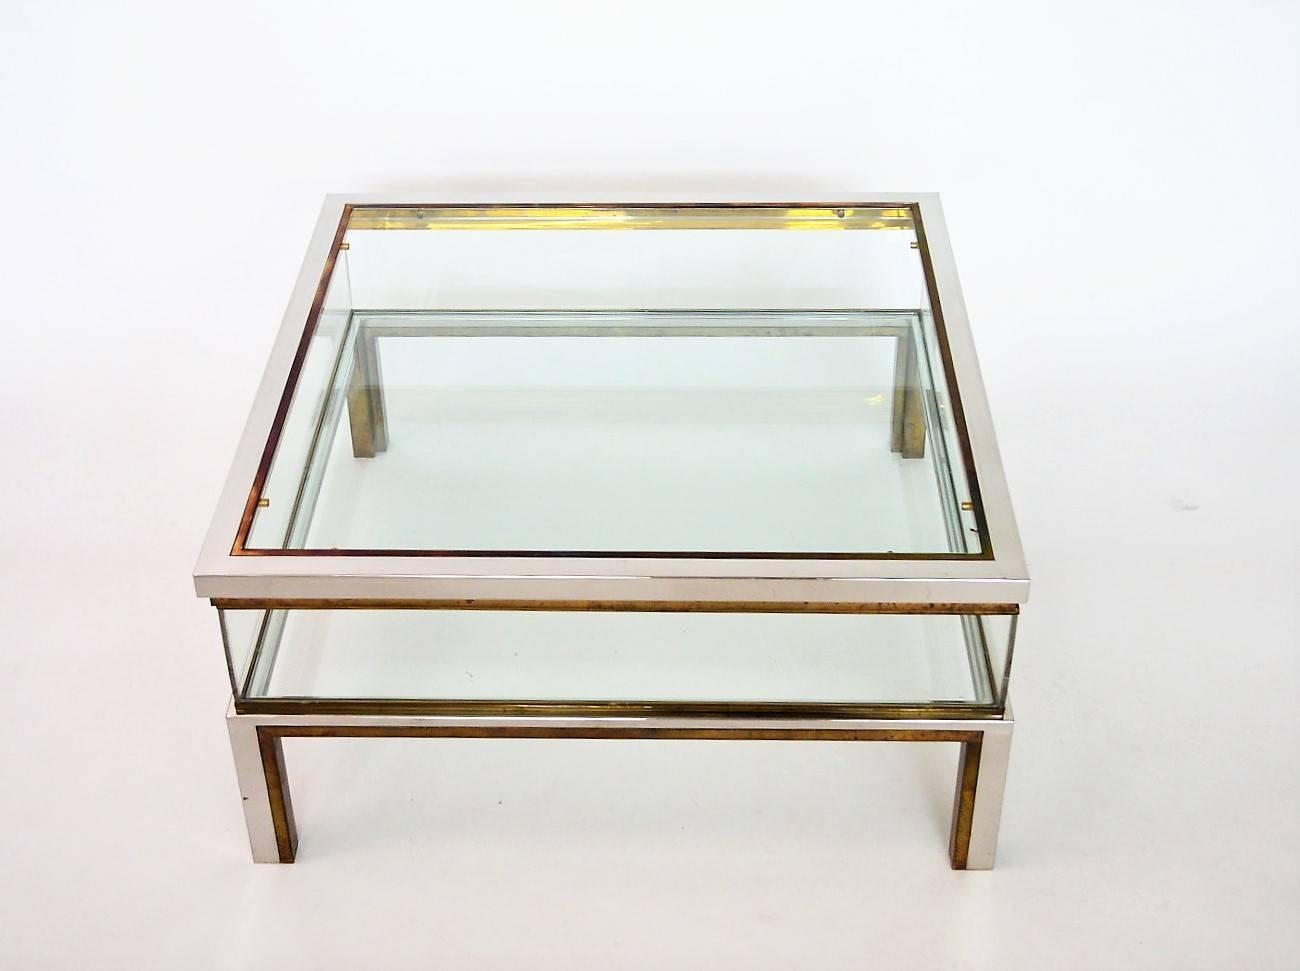 Very elegant 1970s Regency brass and chrome coffee table with internal sliding display case in order to present decorative items, books or magazines.
In the style of Maison Jansen, Made in France, 1970s.

The four transparent internal sides are